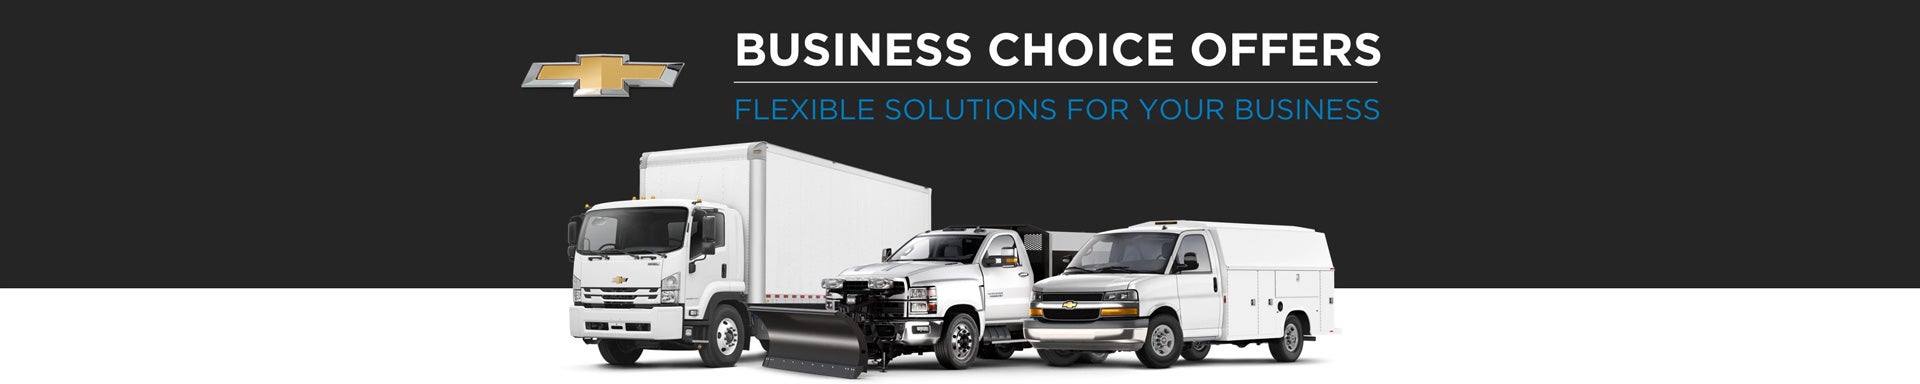 Chevrolet Business Choice Offers - Flexible Solutions for your Business - Romeo Chevrolet Buick GMC in Lake Katrine NY